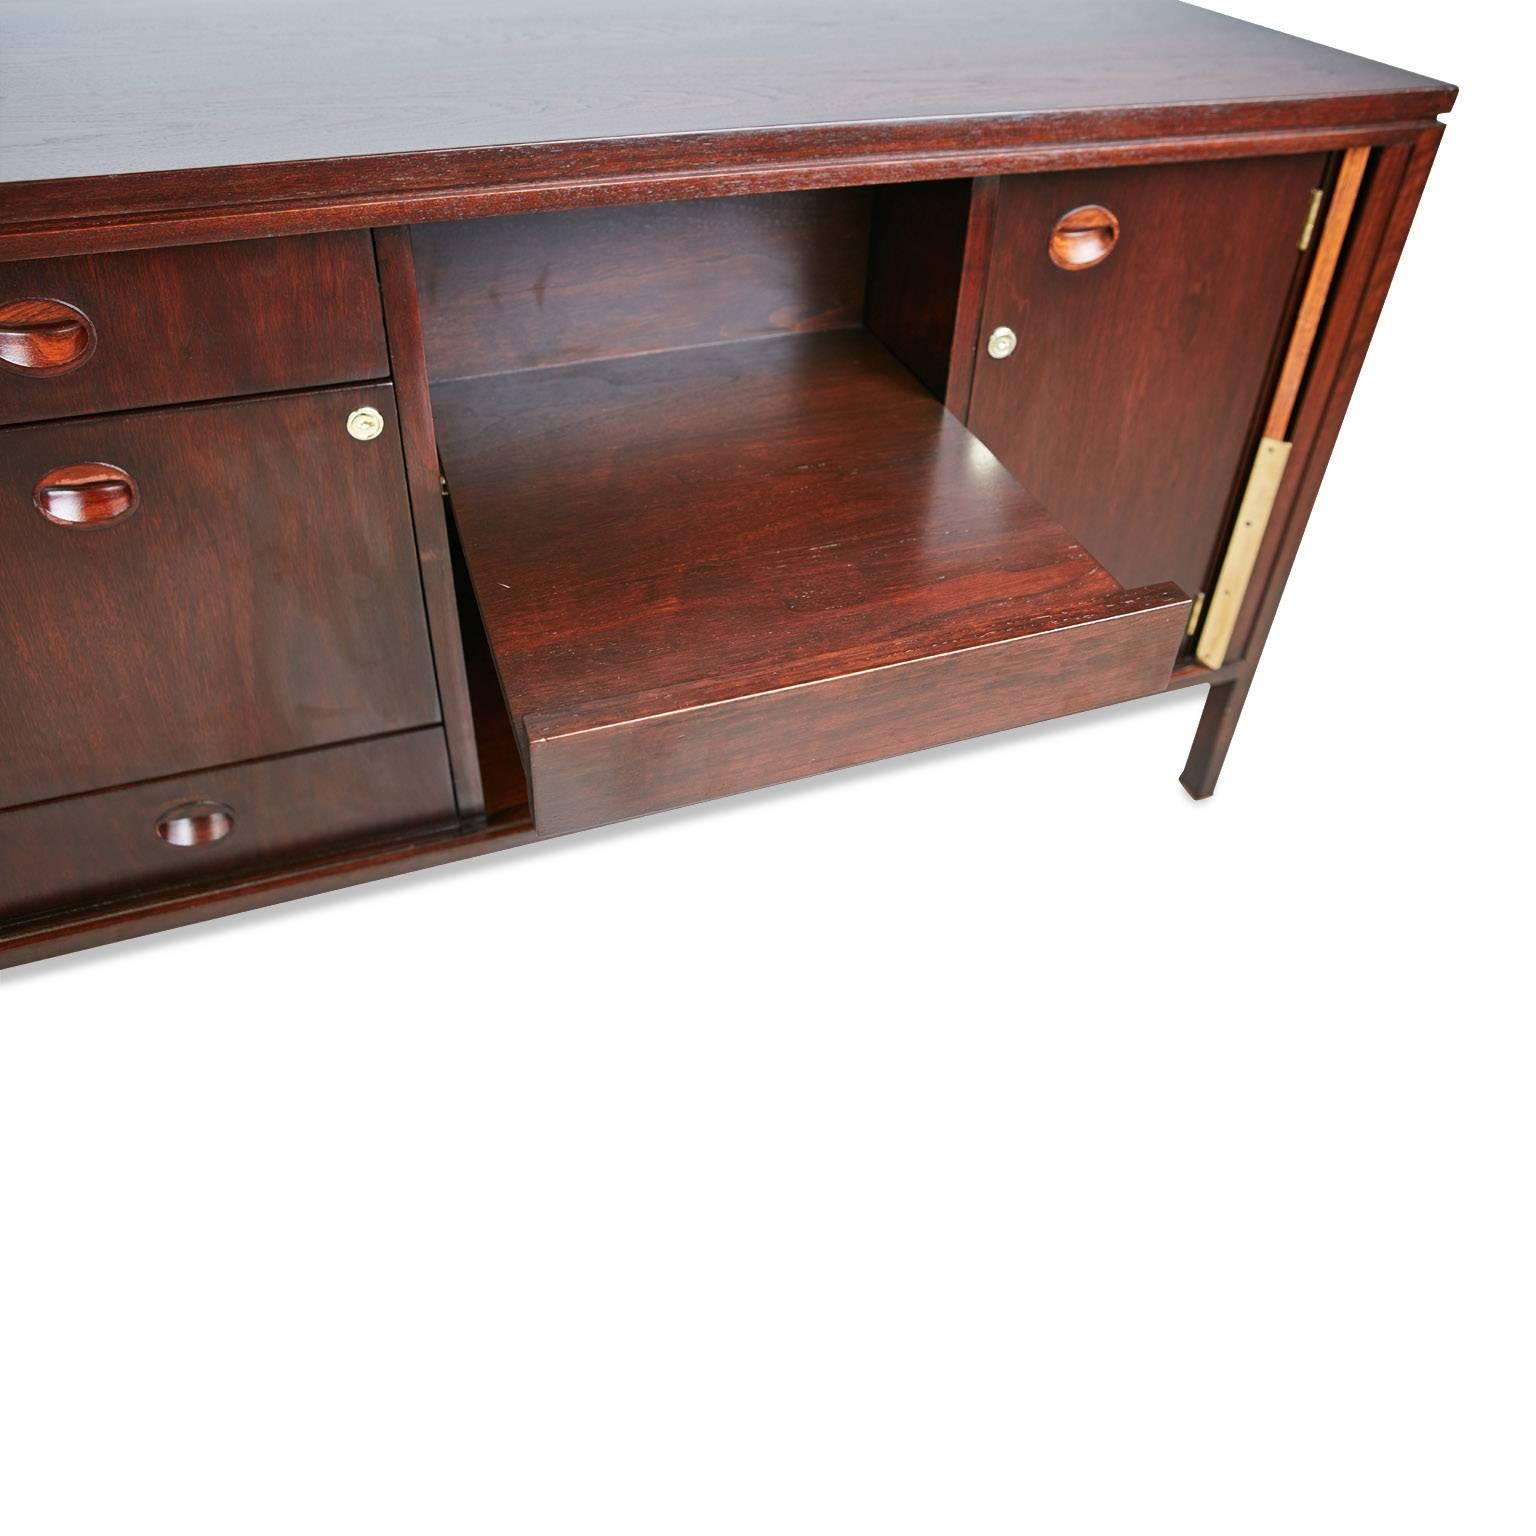 Brass Edward Wormley for Dunbar Tambour Credenza with Pop-Up Table, circa 1960